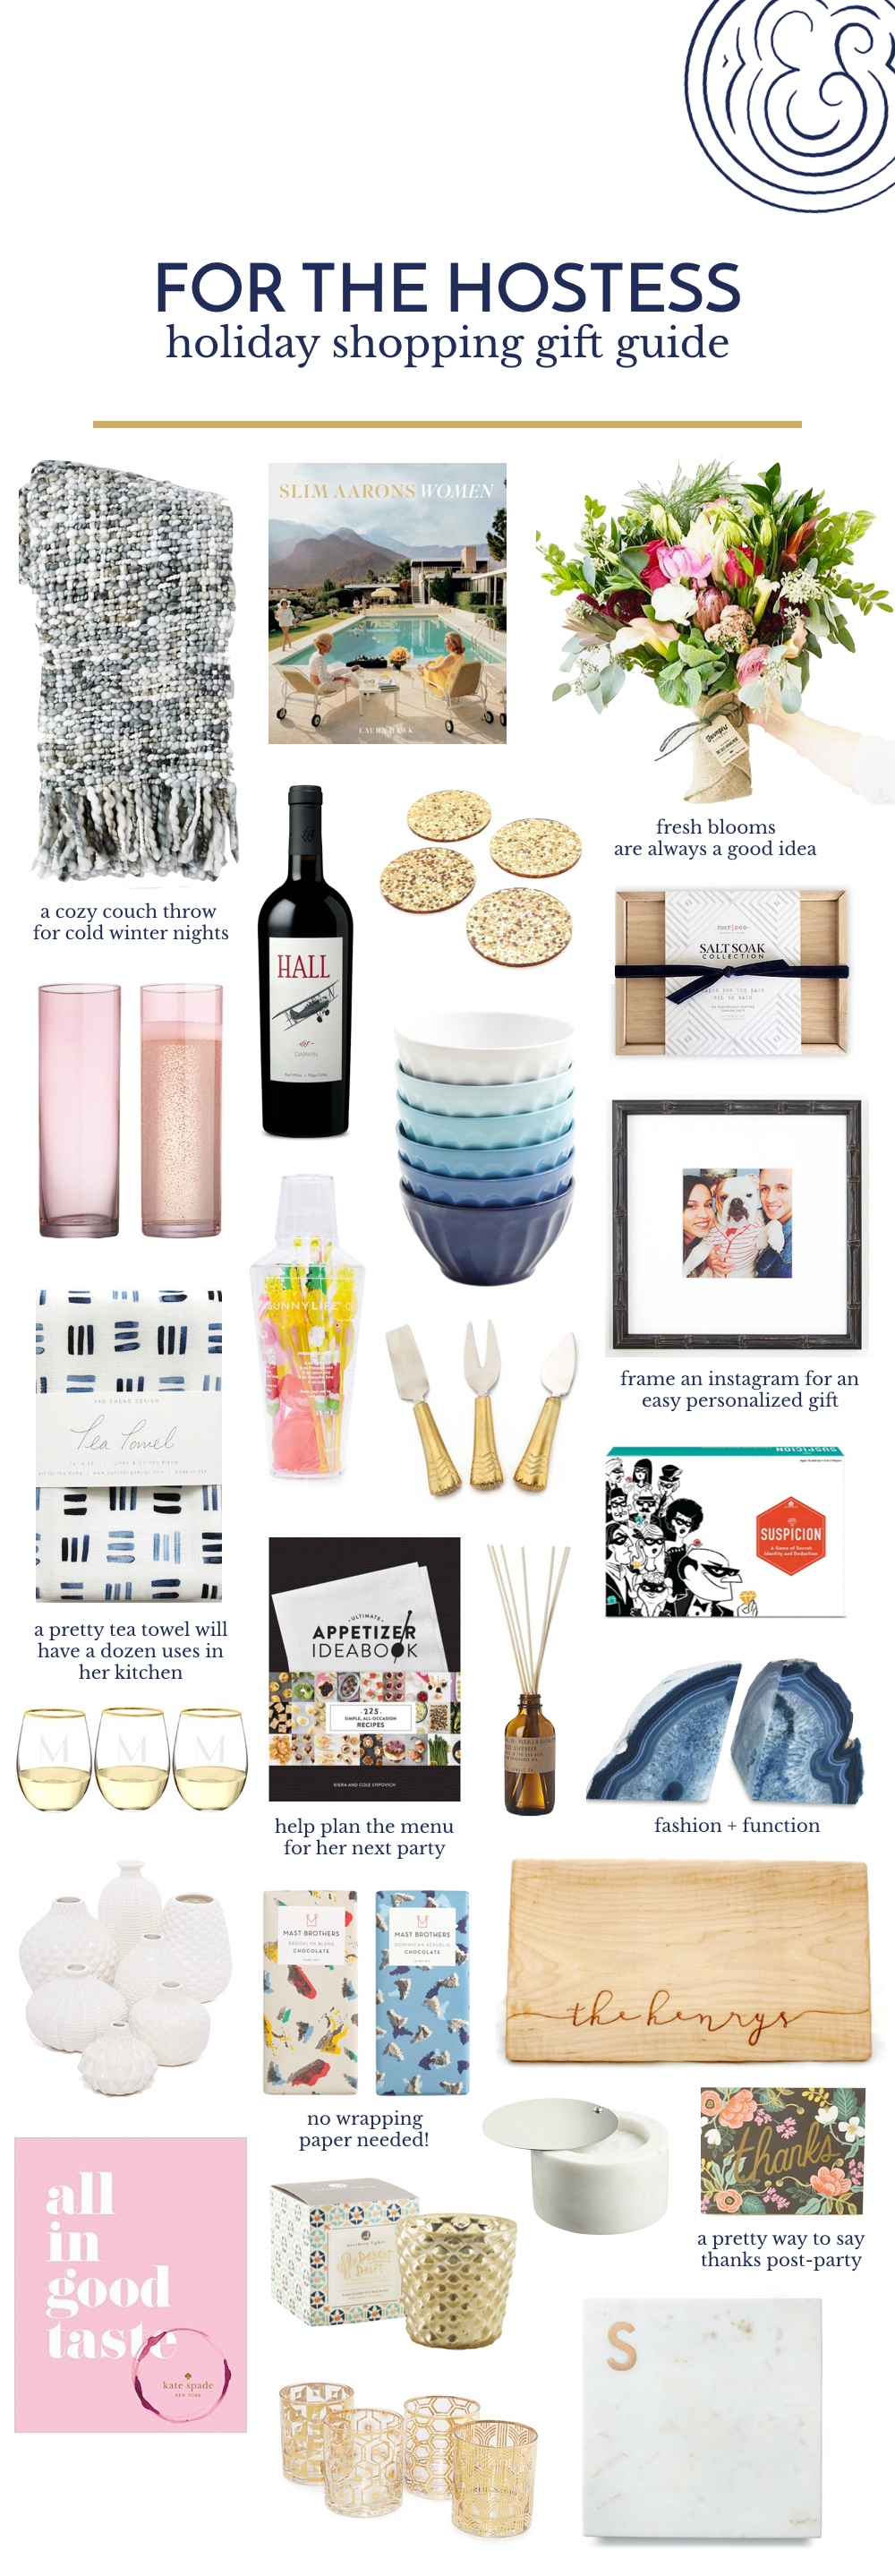 The Best Holiday Gift Ideas for the Hostess.